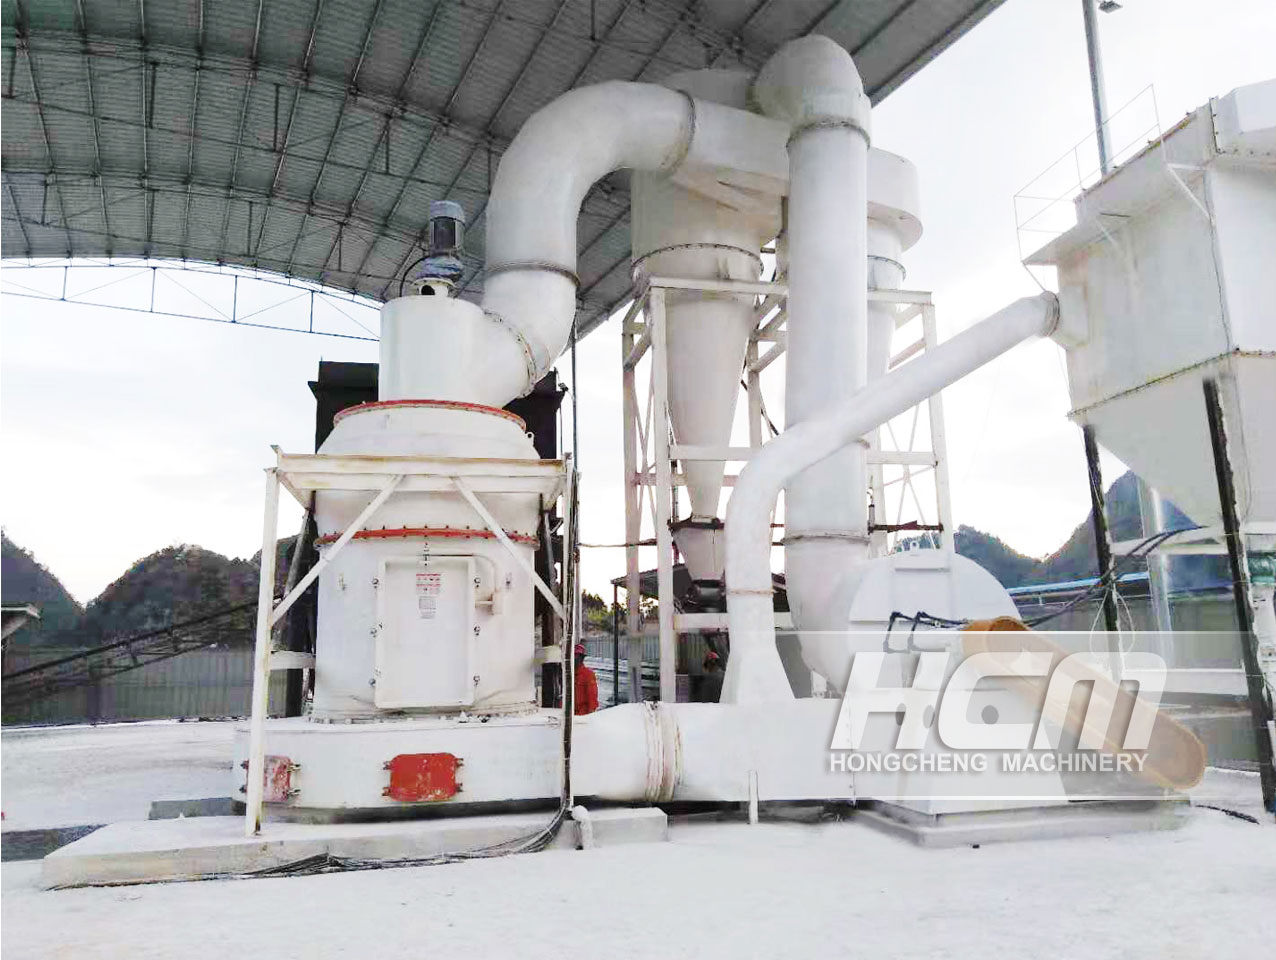 How to choose a silica grinding mill for grinding 120 mesh silica?